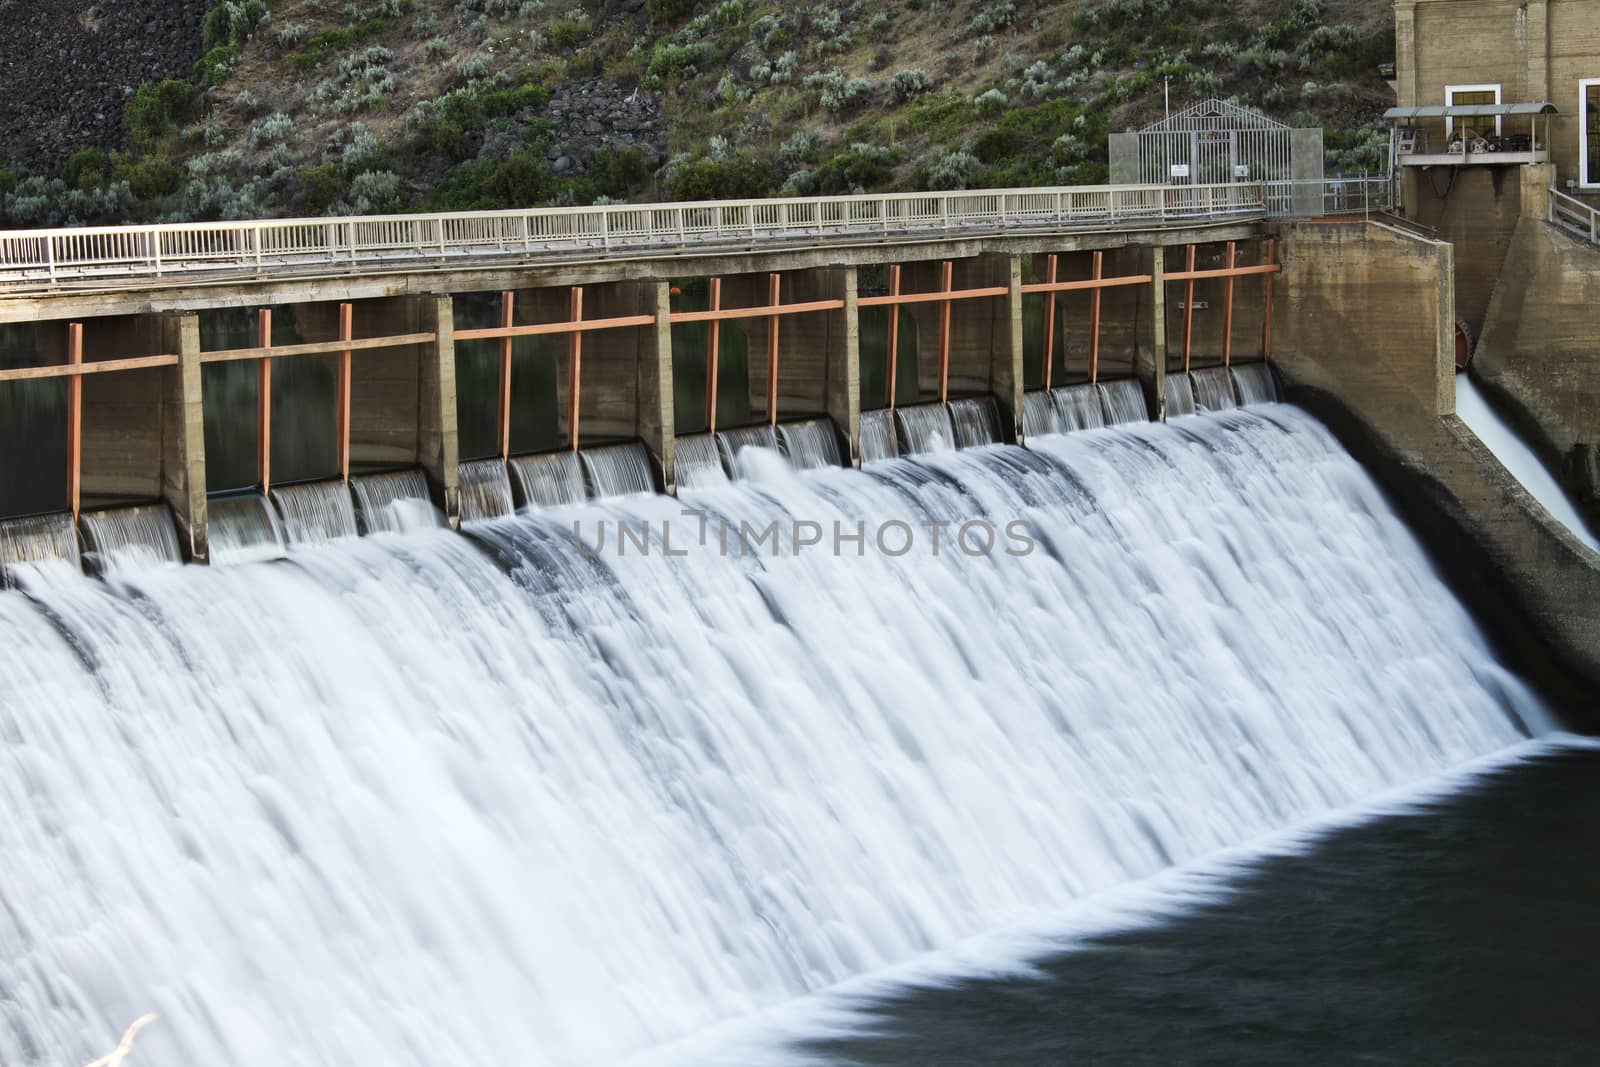 Old hydroelectric dam still standing and in use.